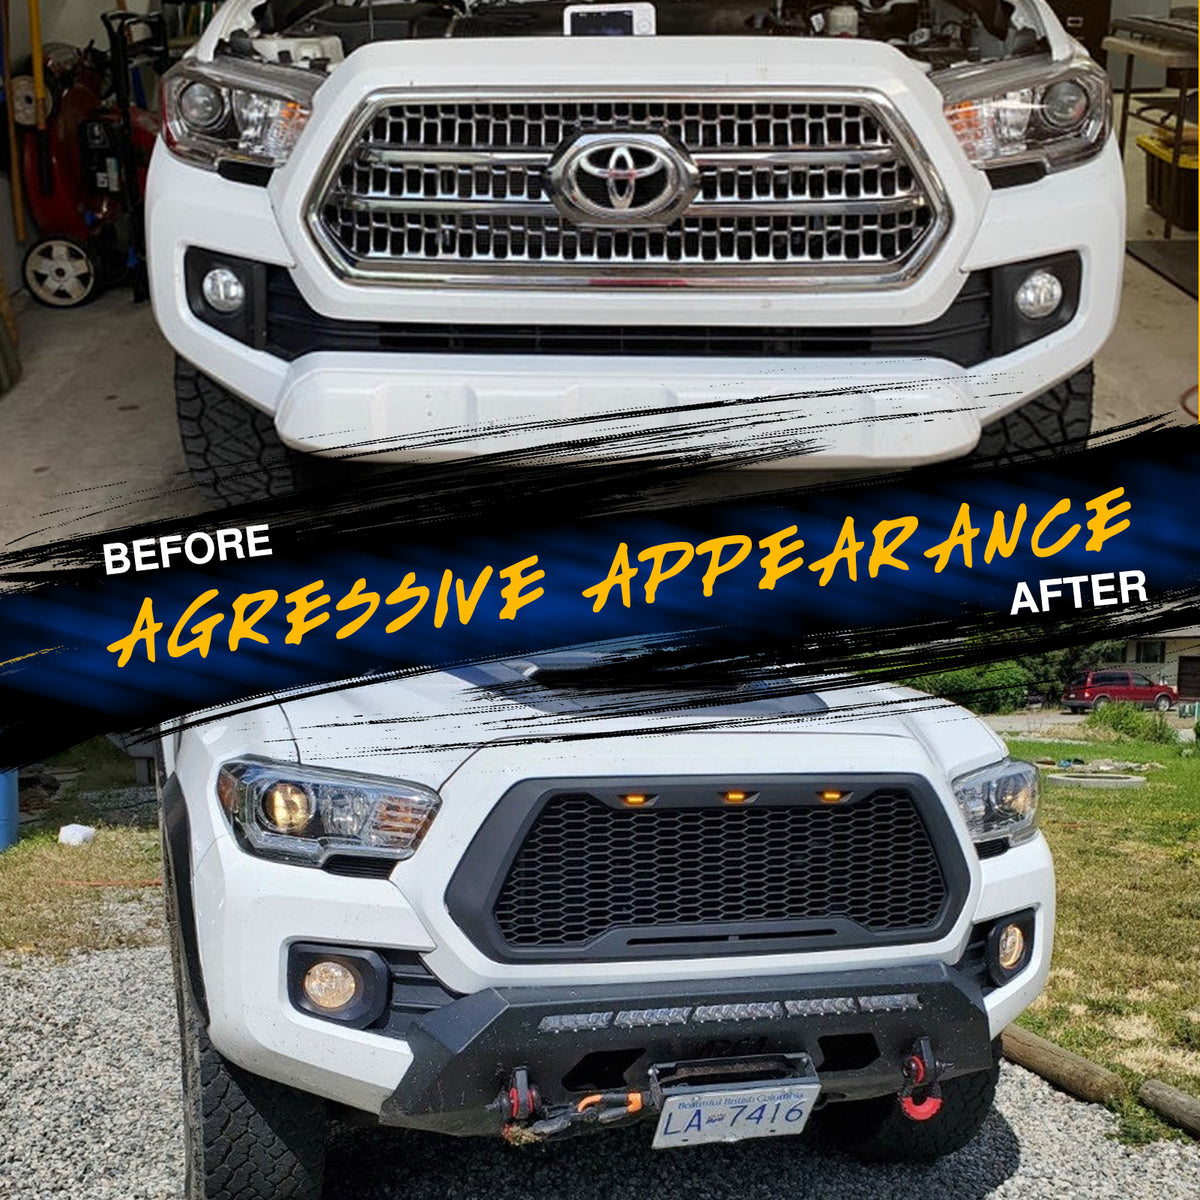 ZGAUTO Replacement ABS Upper Grille Fits for Tacoma 2016-2017 with LED Lights 